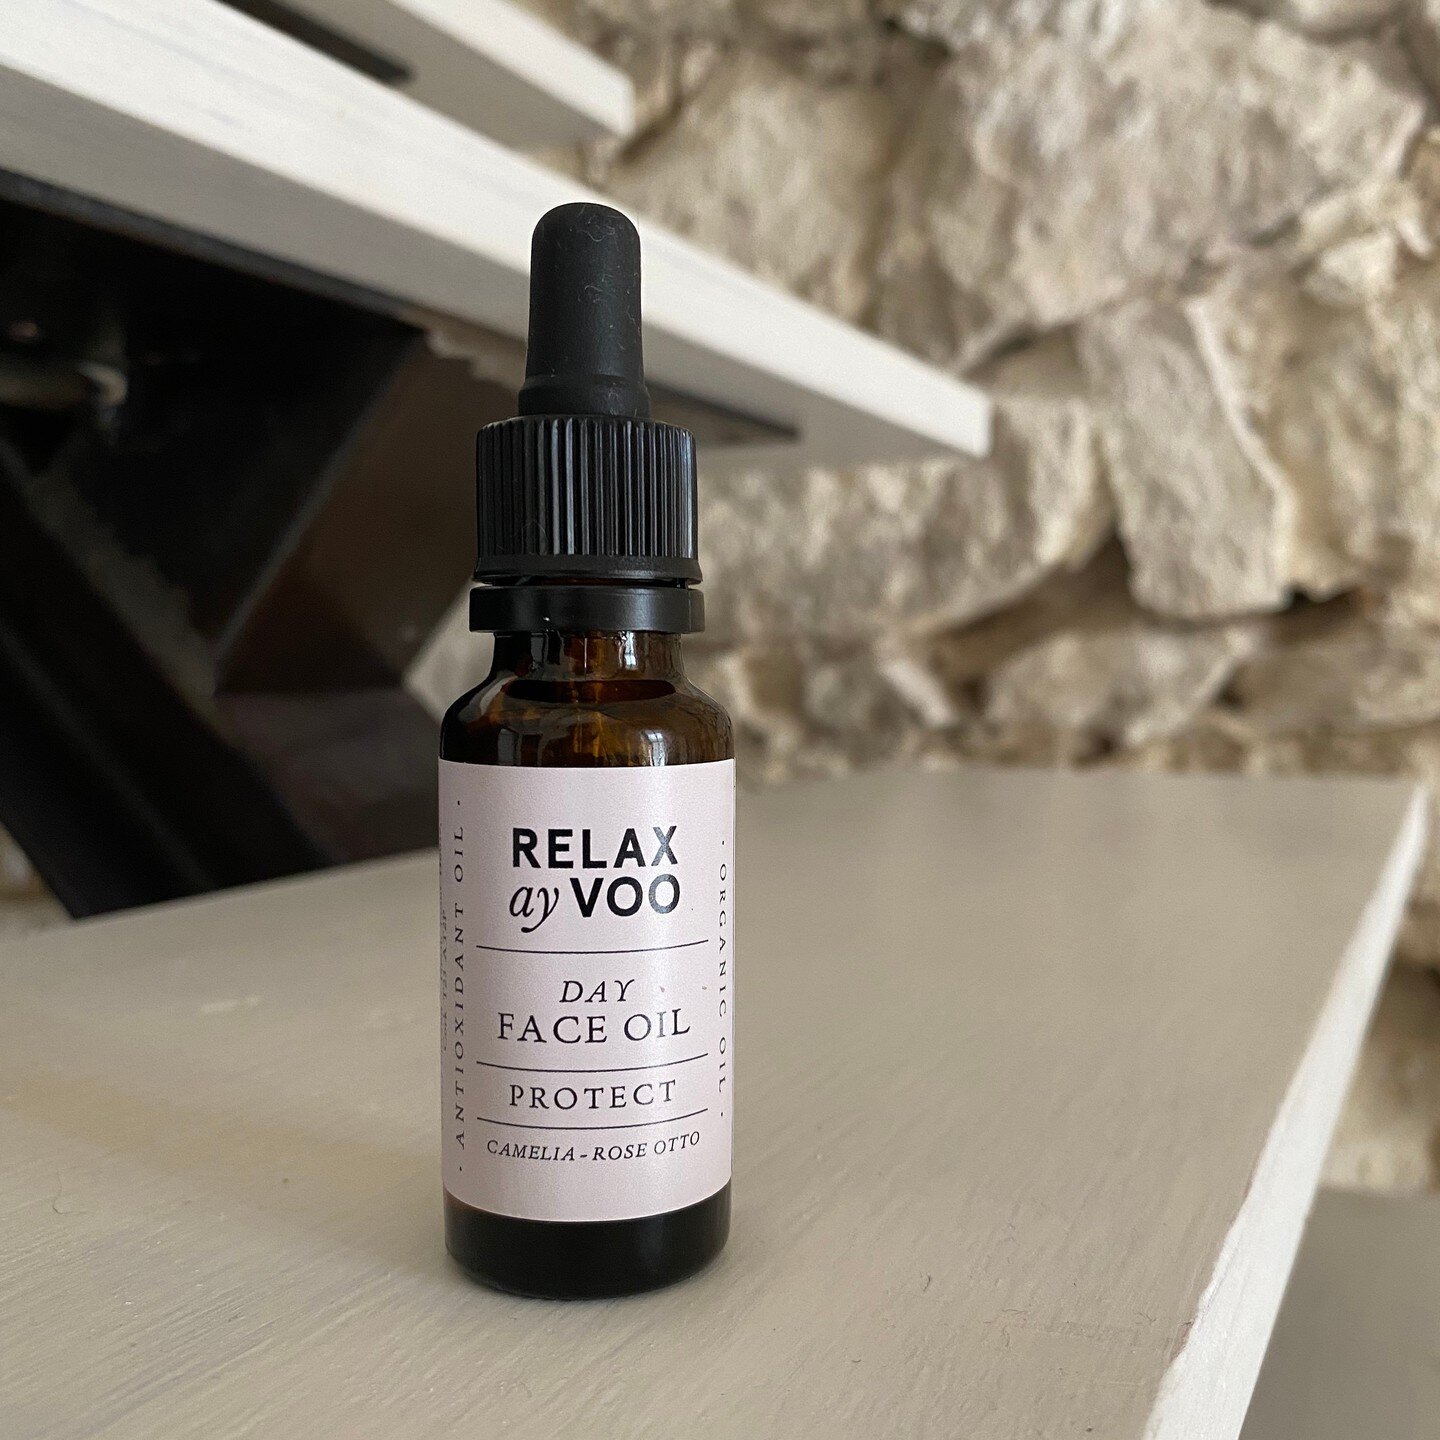 PUFFY CLOUDS, PINK MARSHMALLOWS AND AN EARLY MORNING MIST, KISSING THE ROSE PETALS . 
Many love the scent of this precious moisturising serum containing Rose otto essential oil. 
&lsquo;Rosa damascena&rsquo; has uplifting, rejuvenating and energising